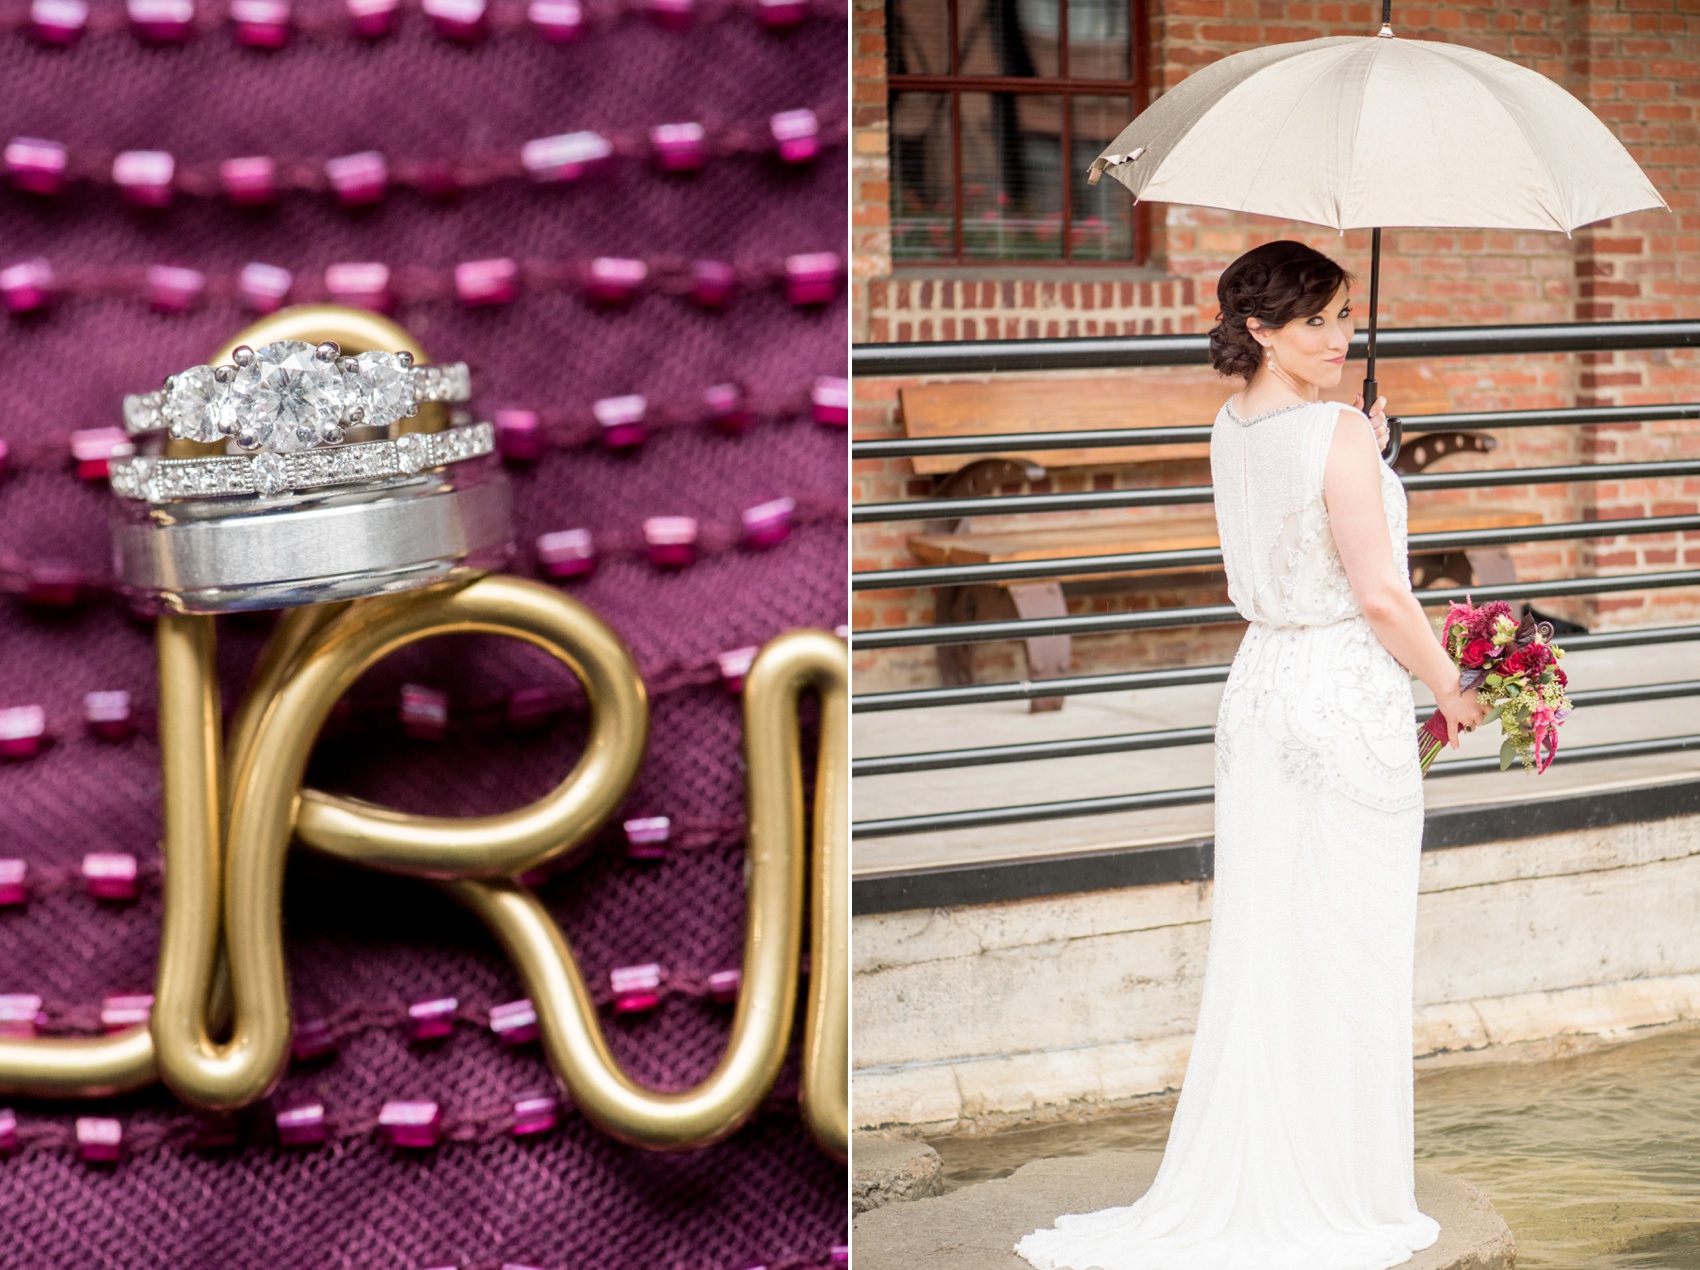 Bay 7 wedding photos by Mikkel Paige Photography. Raleigh wedding photographer captures the bride in her art deco gown in the rain with an umbrella and ring detail images.